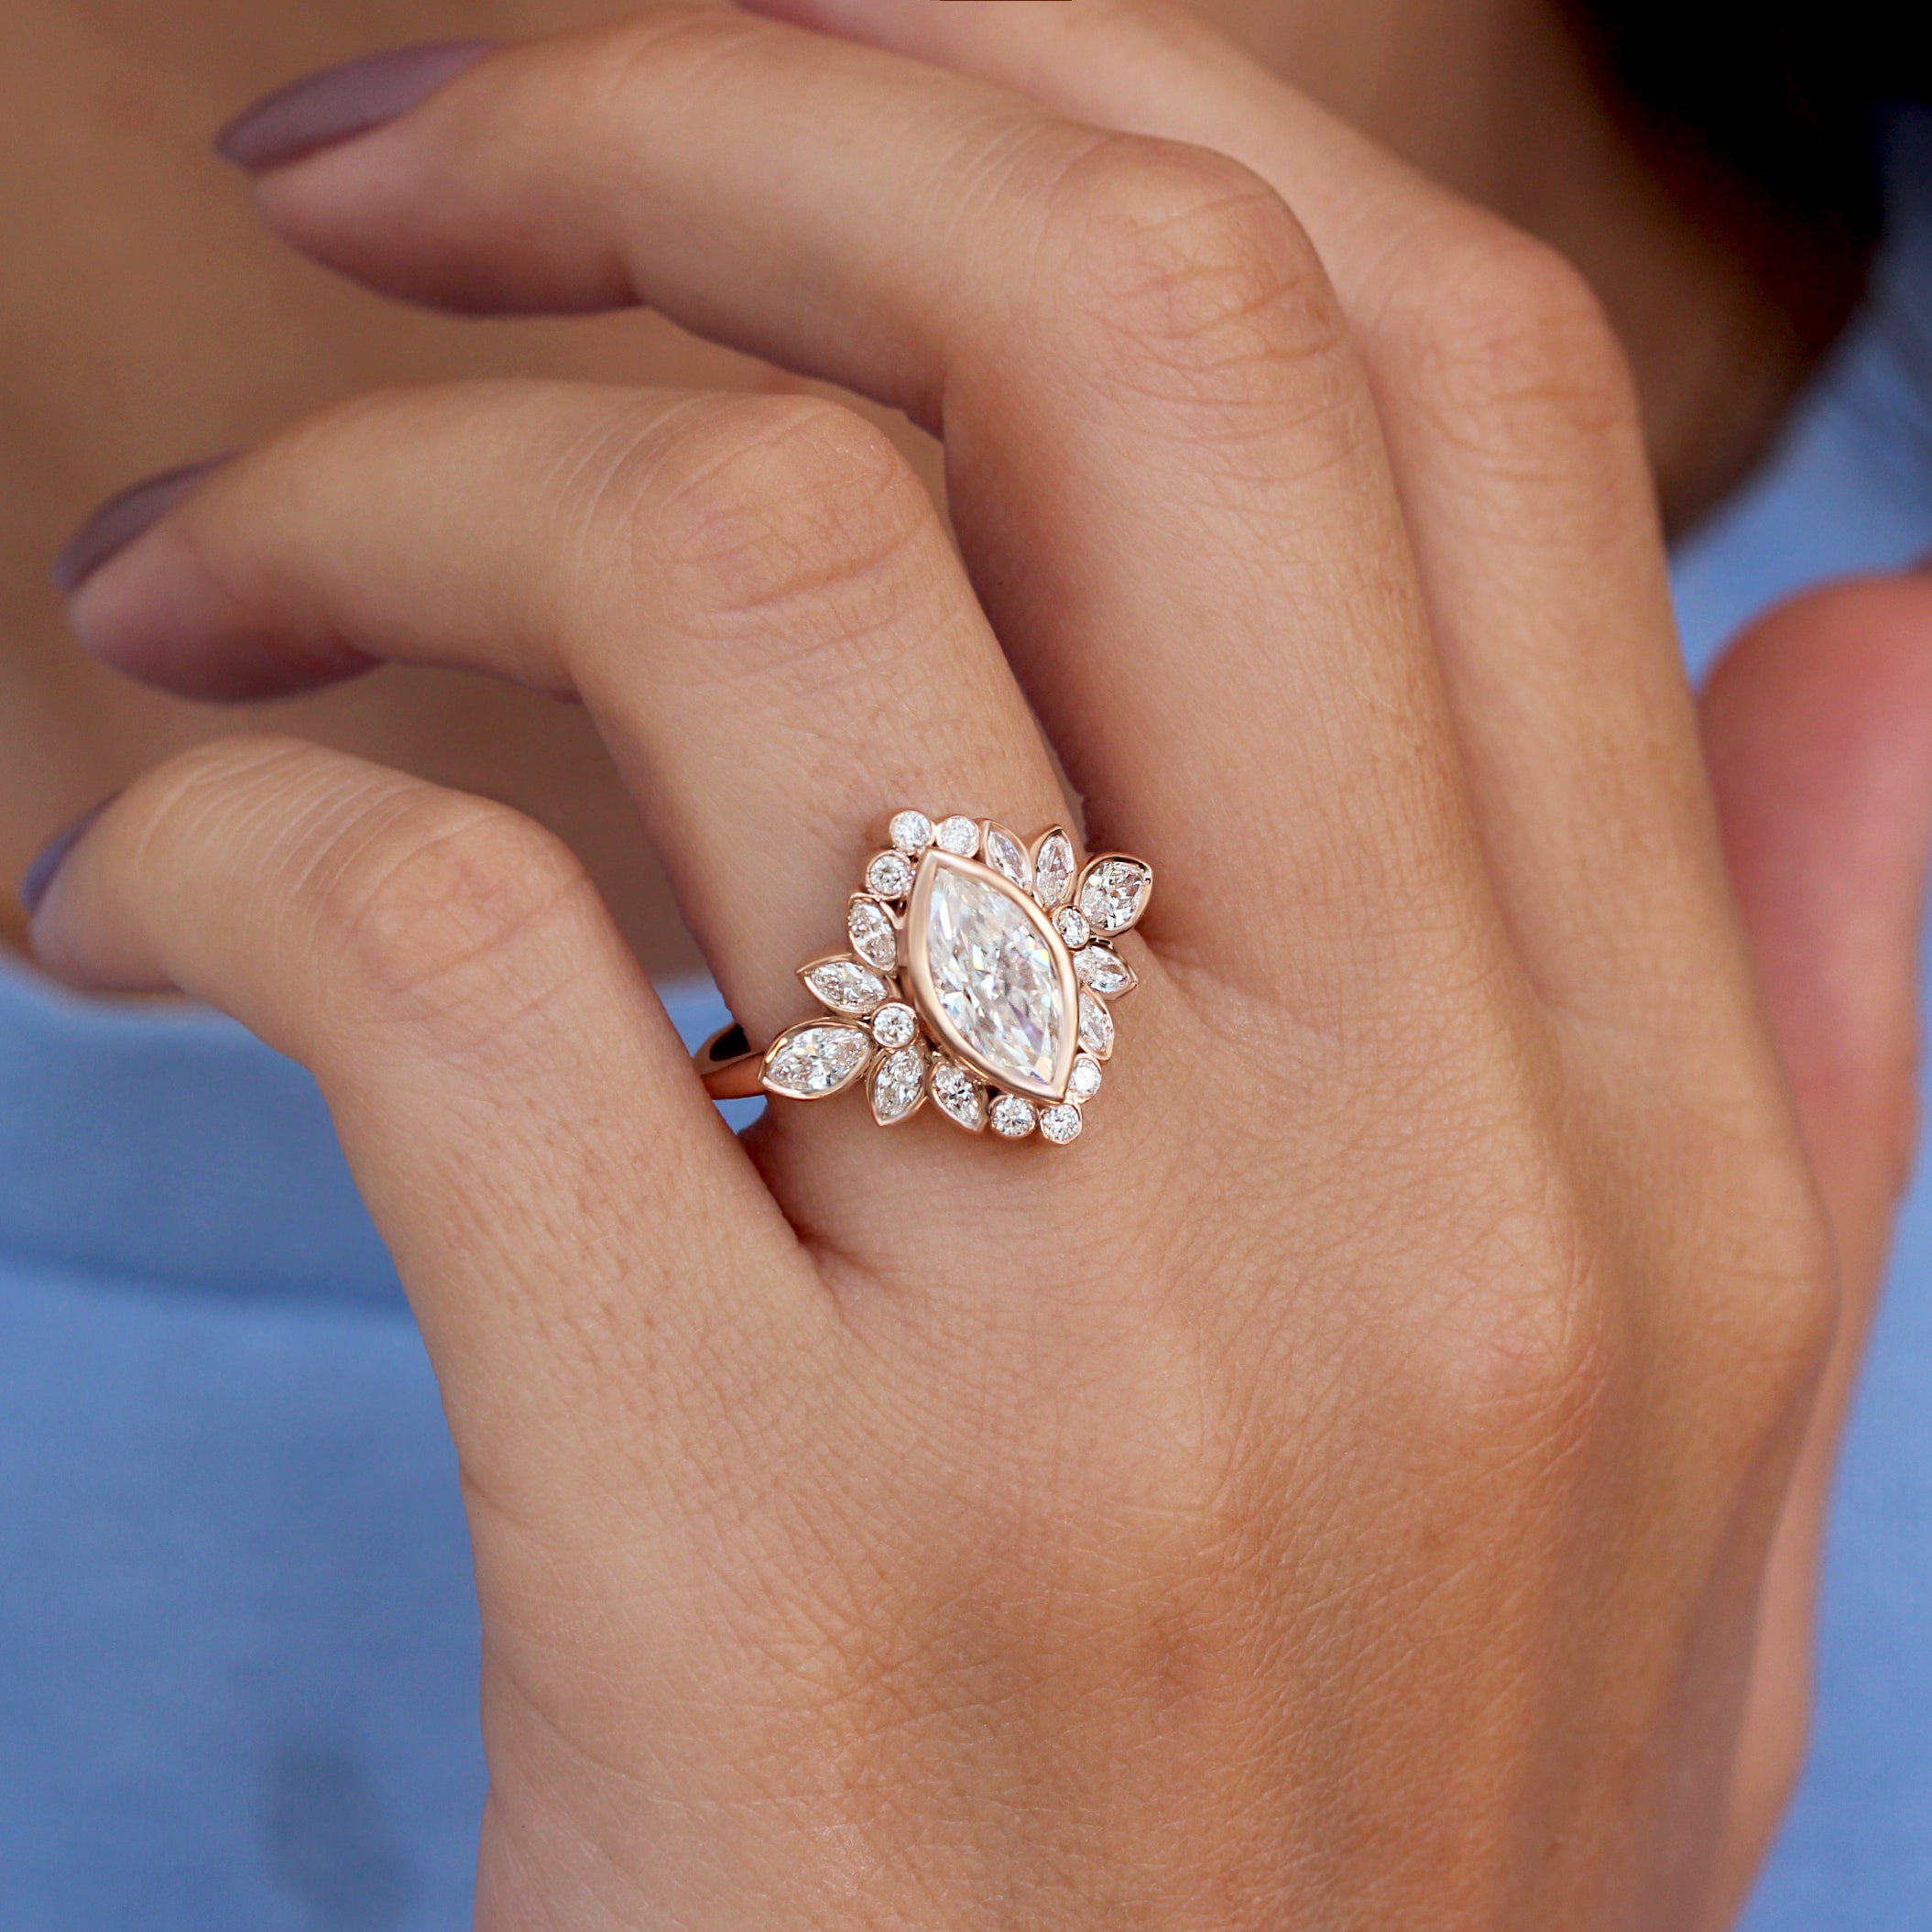 Beautiful Marquise Diamond Floral cluster Engagement Ring, all diamonds are bezel set. Designed by Silly Shiny Diamonds.
 A Luxurious and unique design, handmade with ethical and environmentally friendly stones. 
The perfect ring that doesn't catch